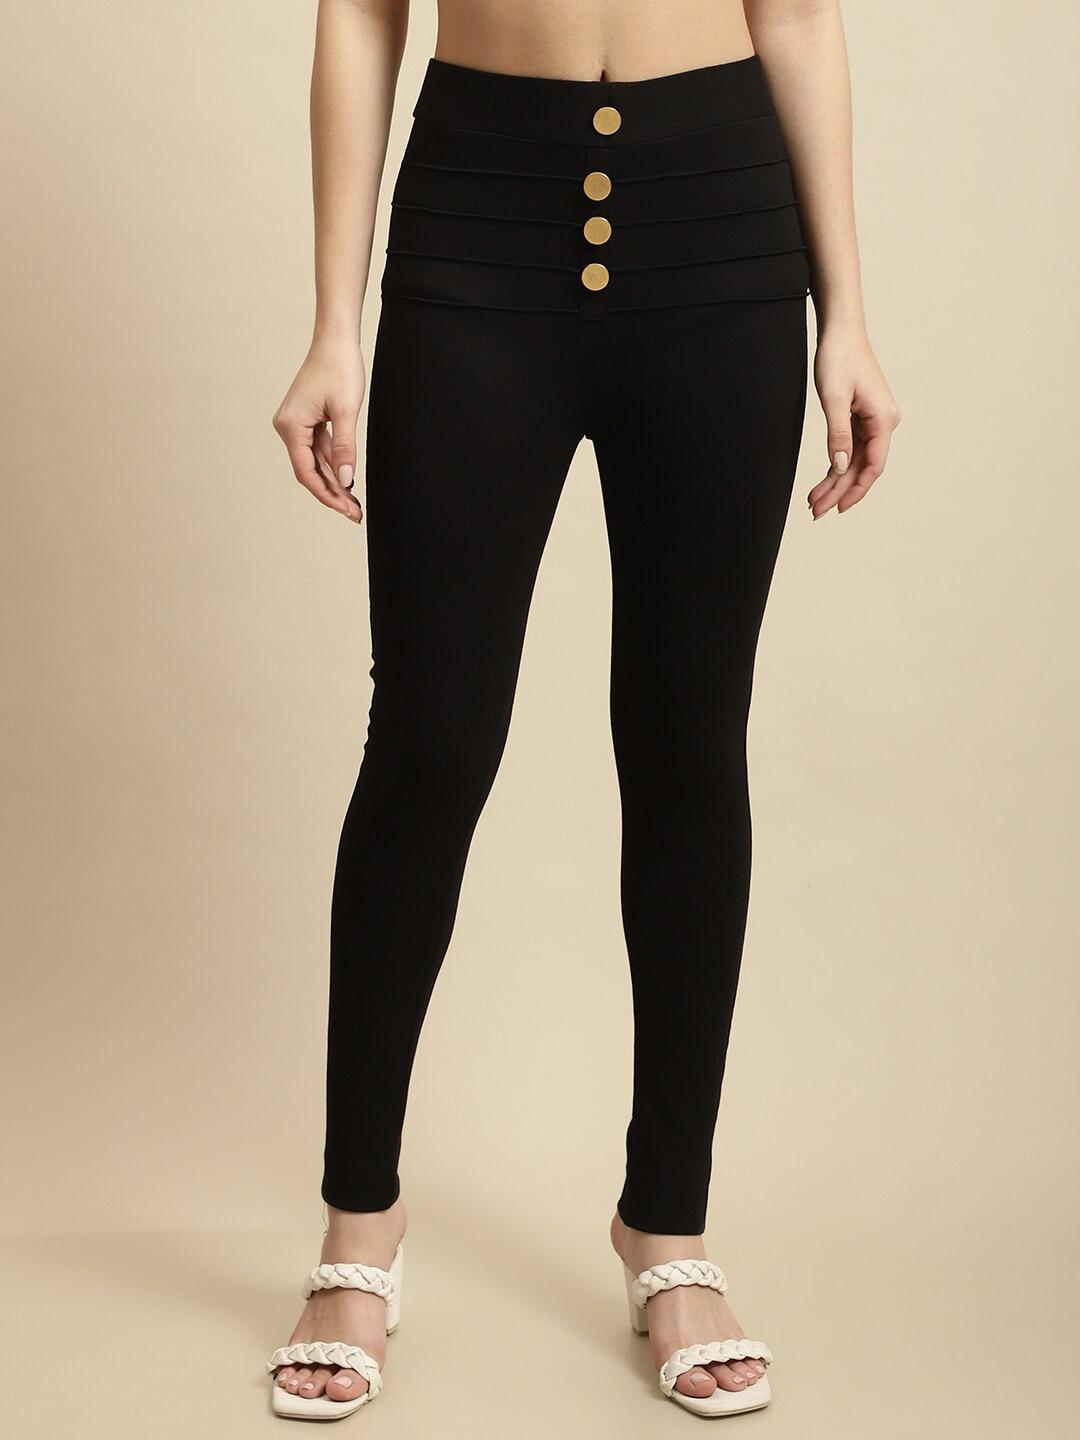 tag-7-women-mid-rise-skinny-fit-ankle-length-jeggings